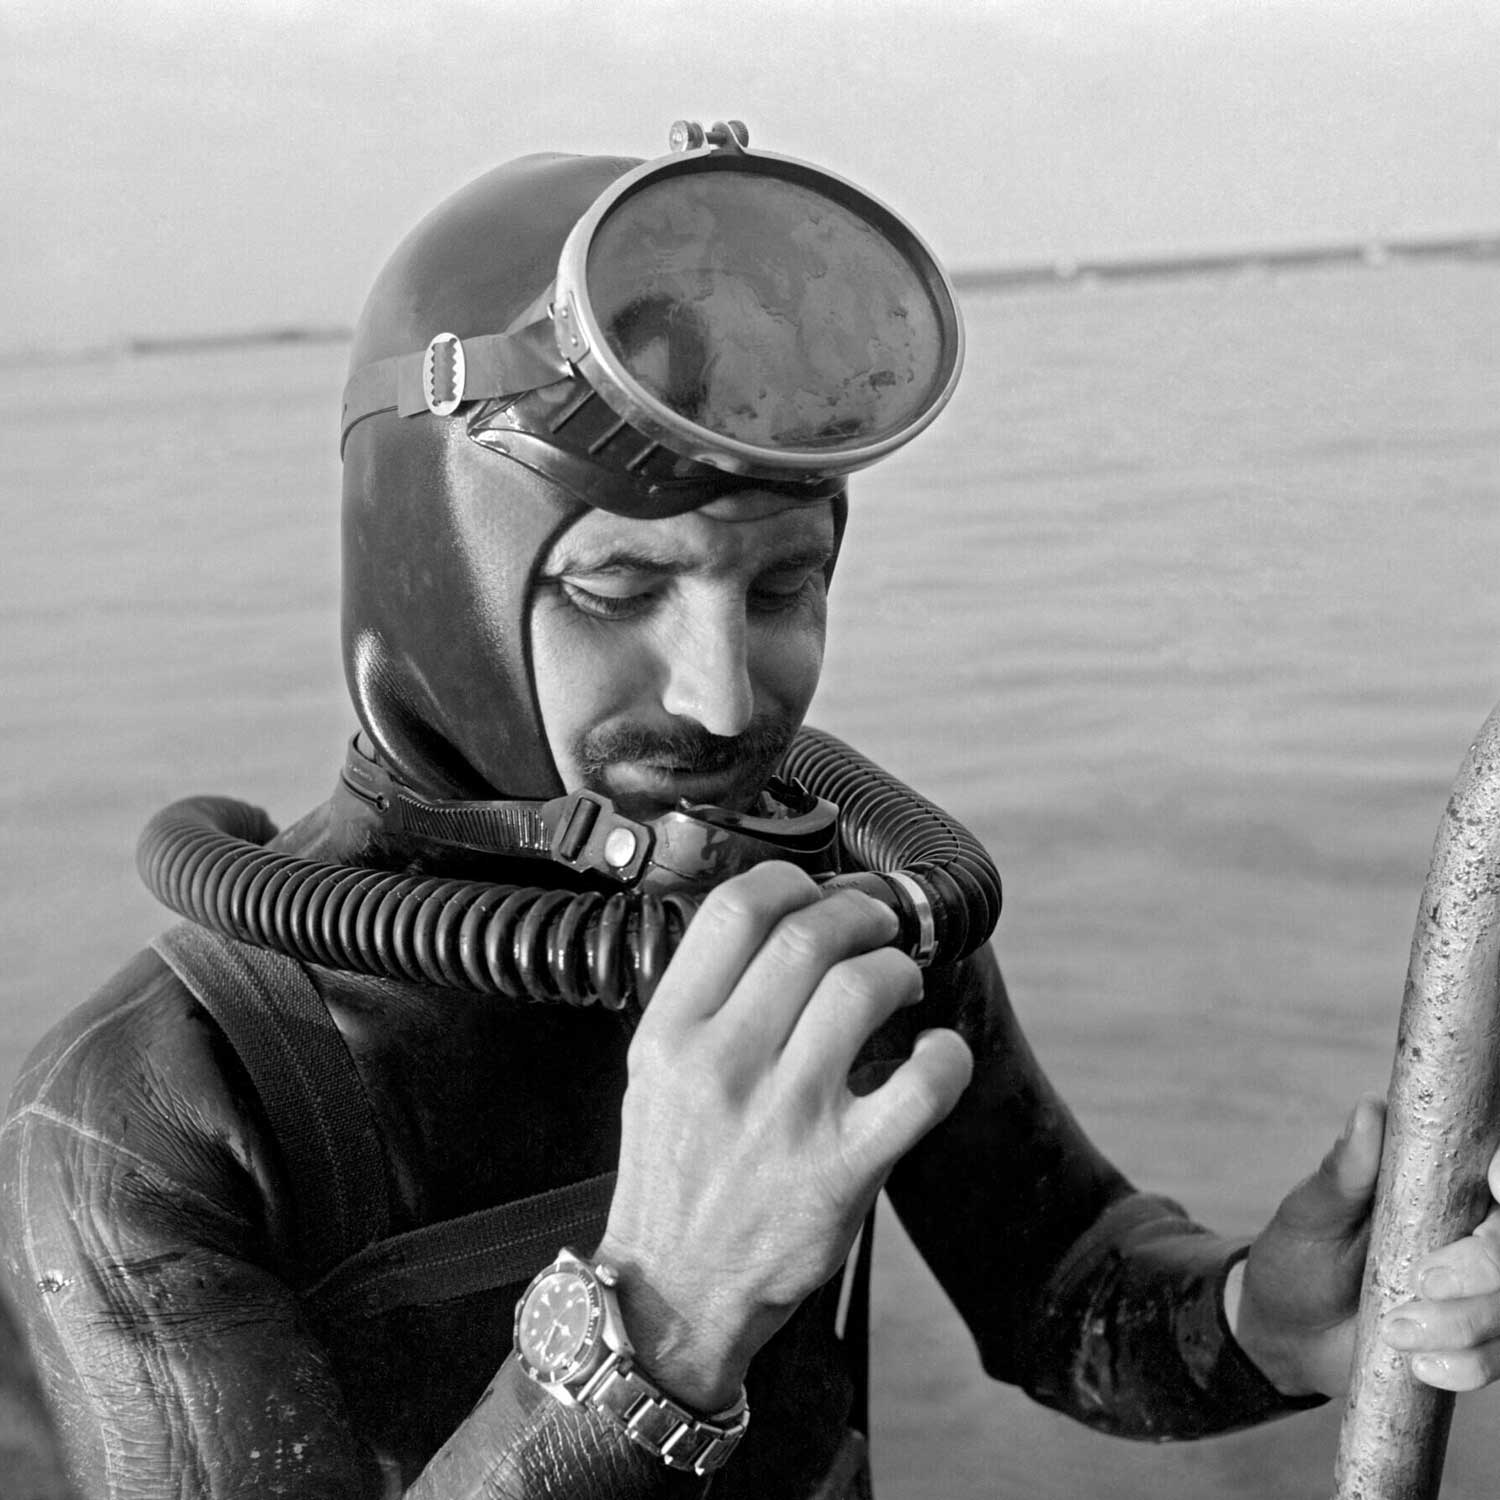 An MN Navy diver wearing a "Big Crown" Submariner